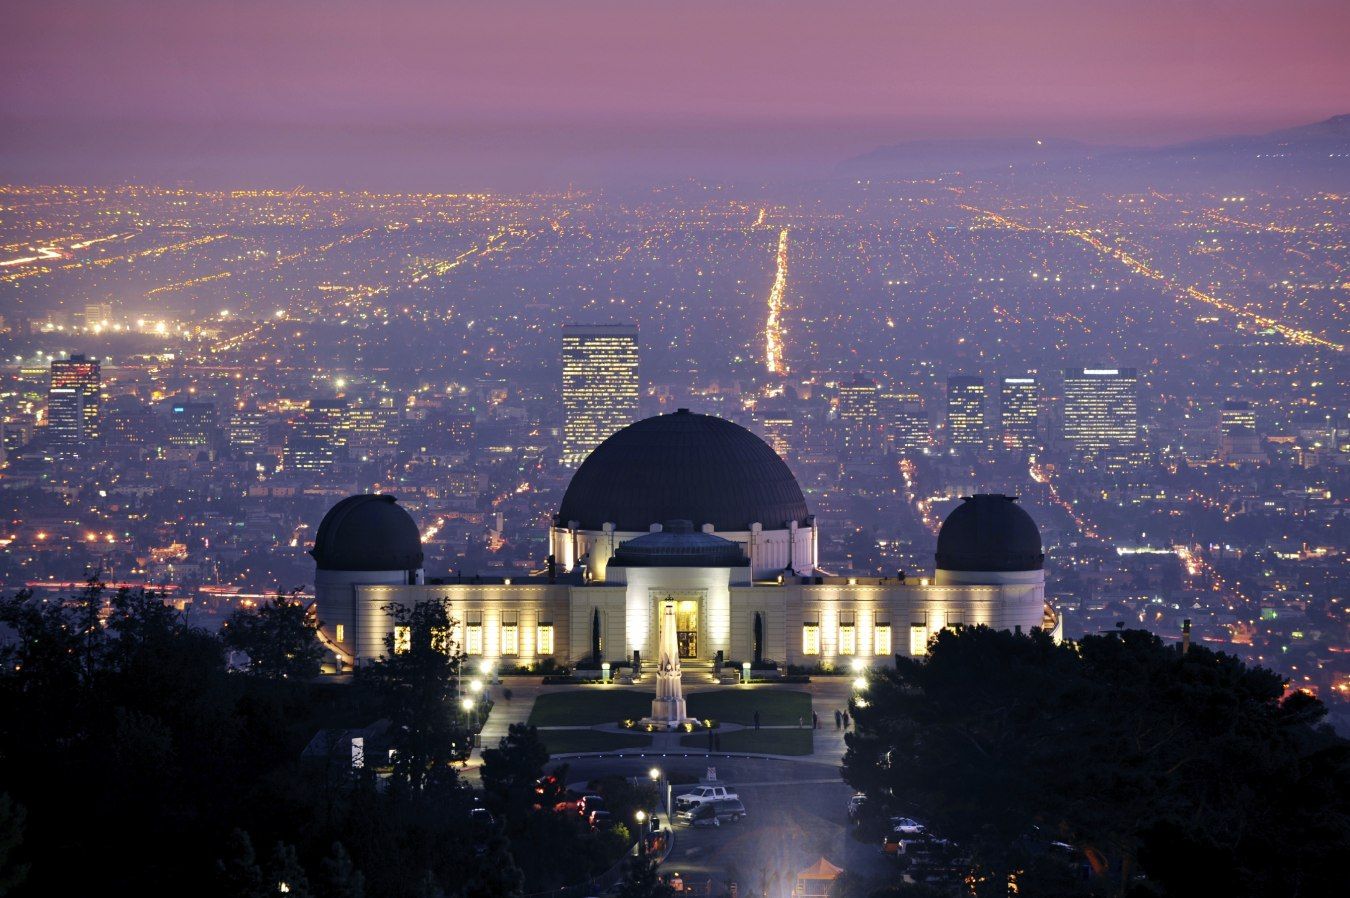 /assets/contentimages/los-angeles-griffith-park-observatory.jpg